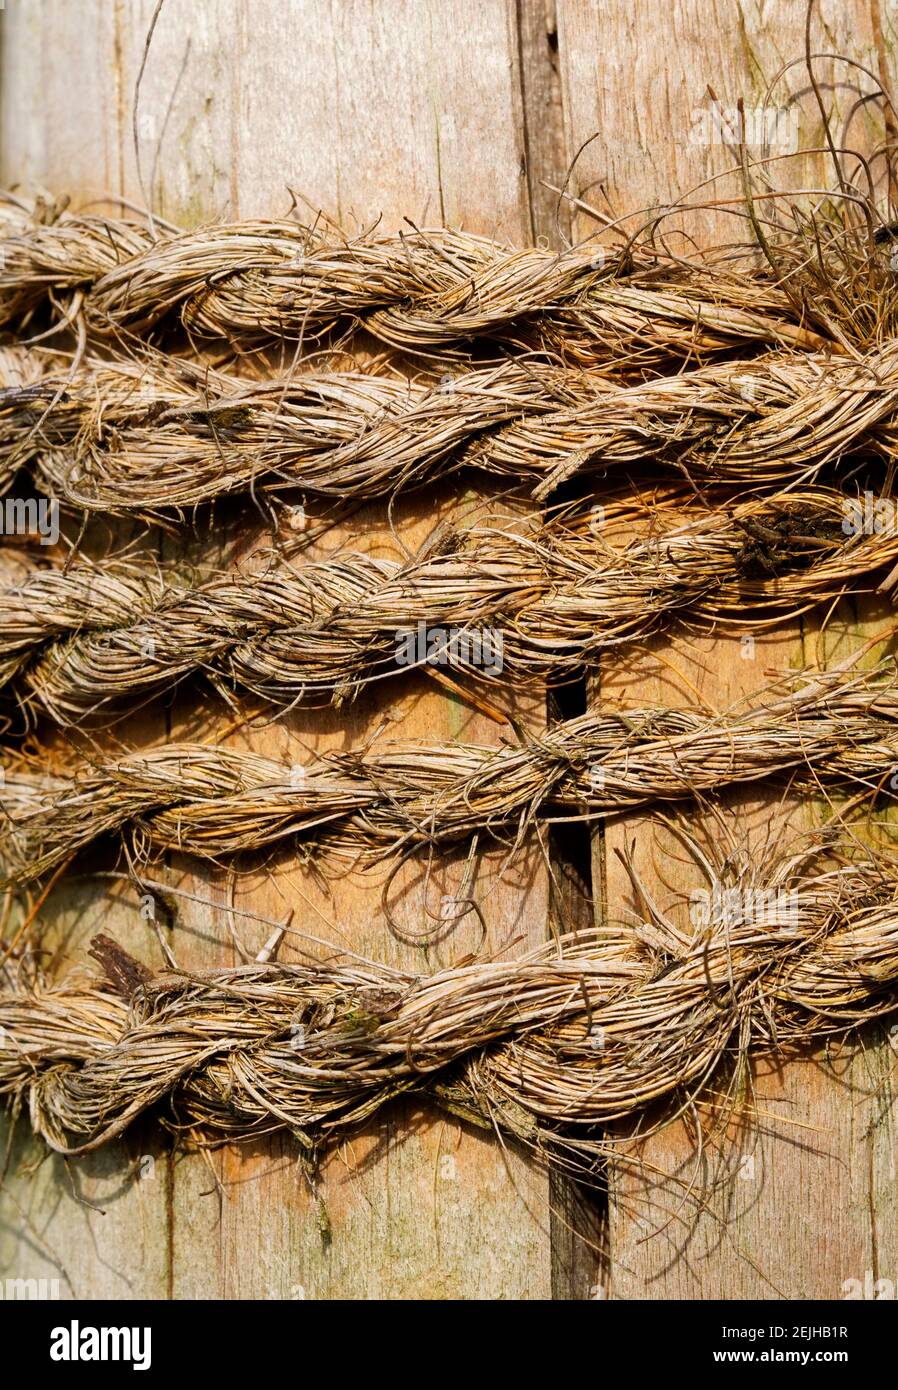 Hemp rope on a wooden background. Brown tones as a background Stock Photo